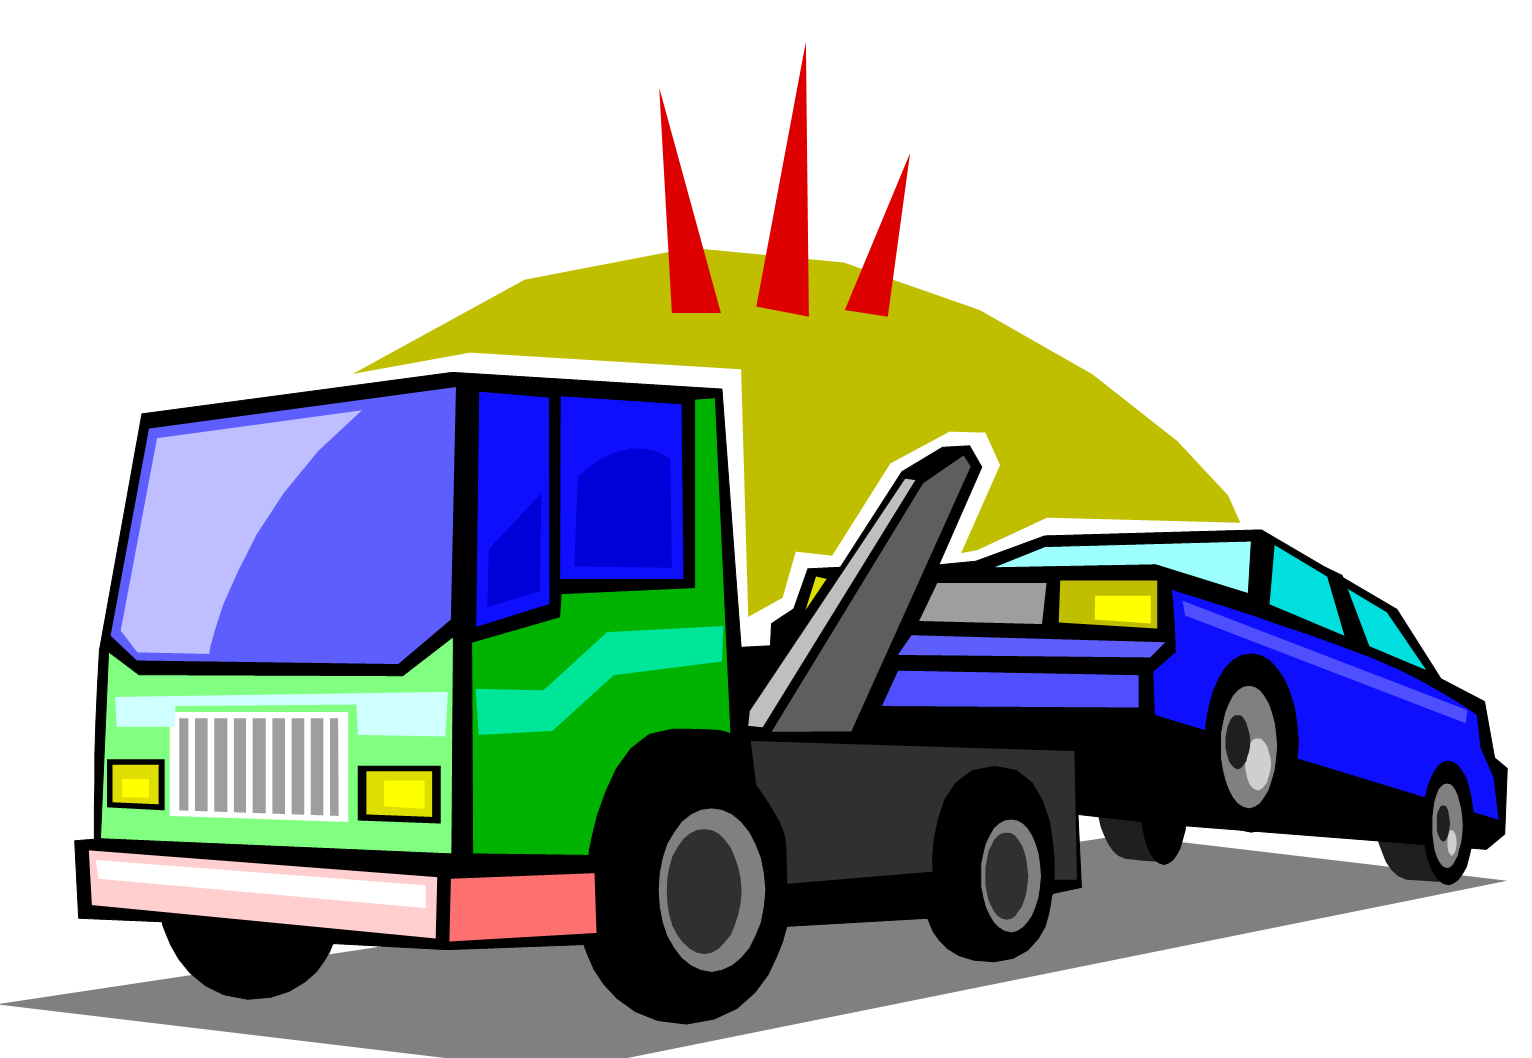 Tow Truck Towing Clipart